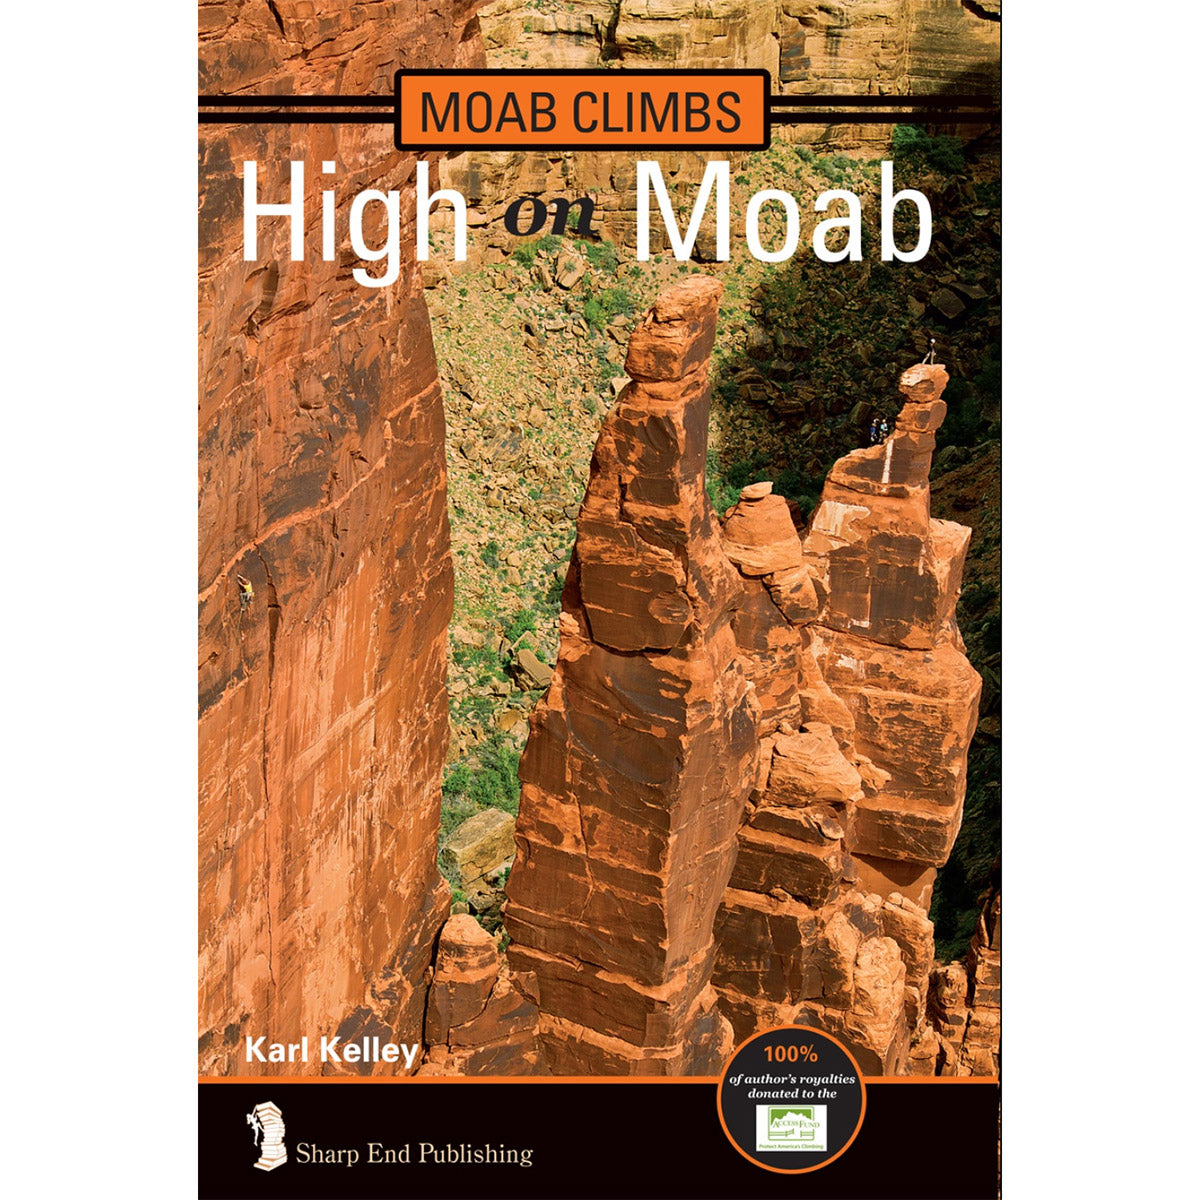 high on moab guidebook